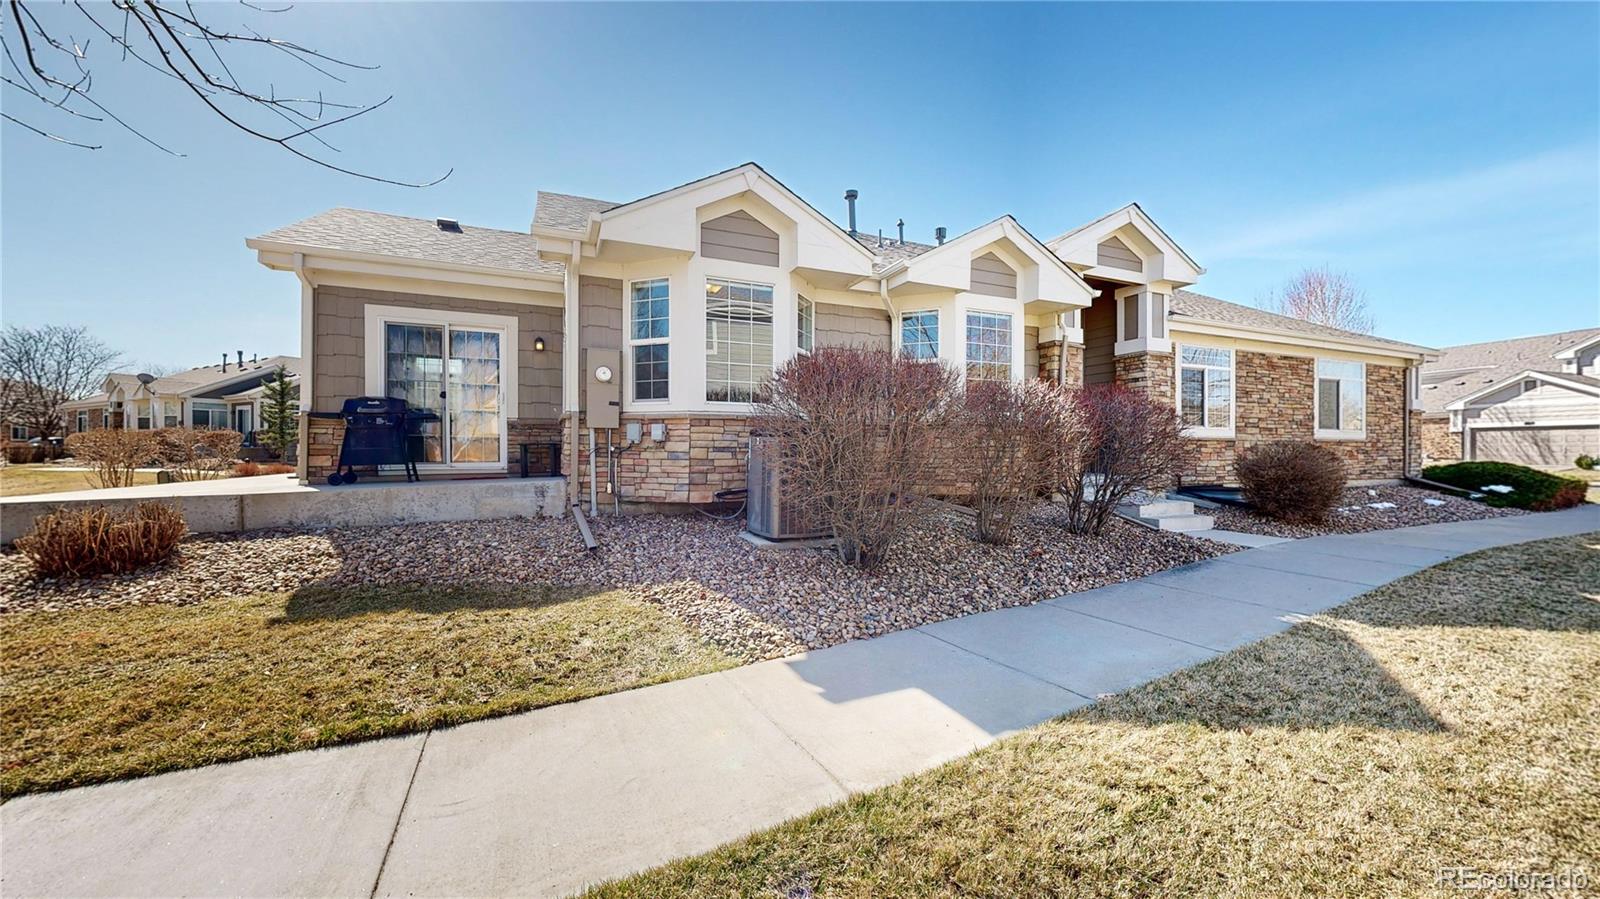 Report Image for 13714  Stone Circle,Broomfield, Colorado